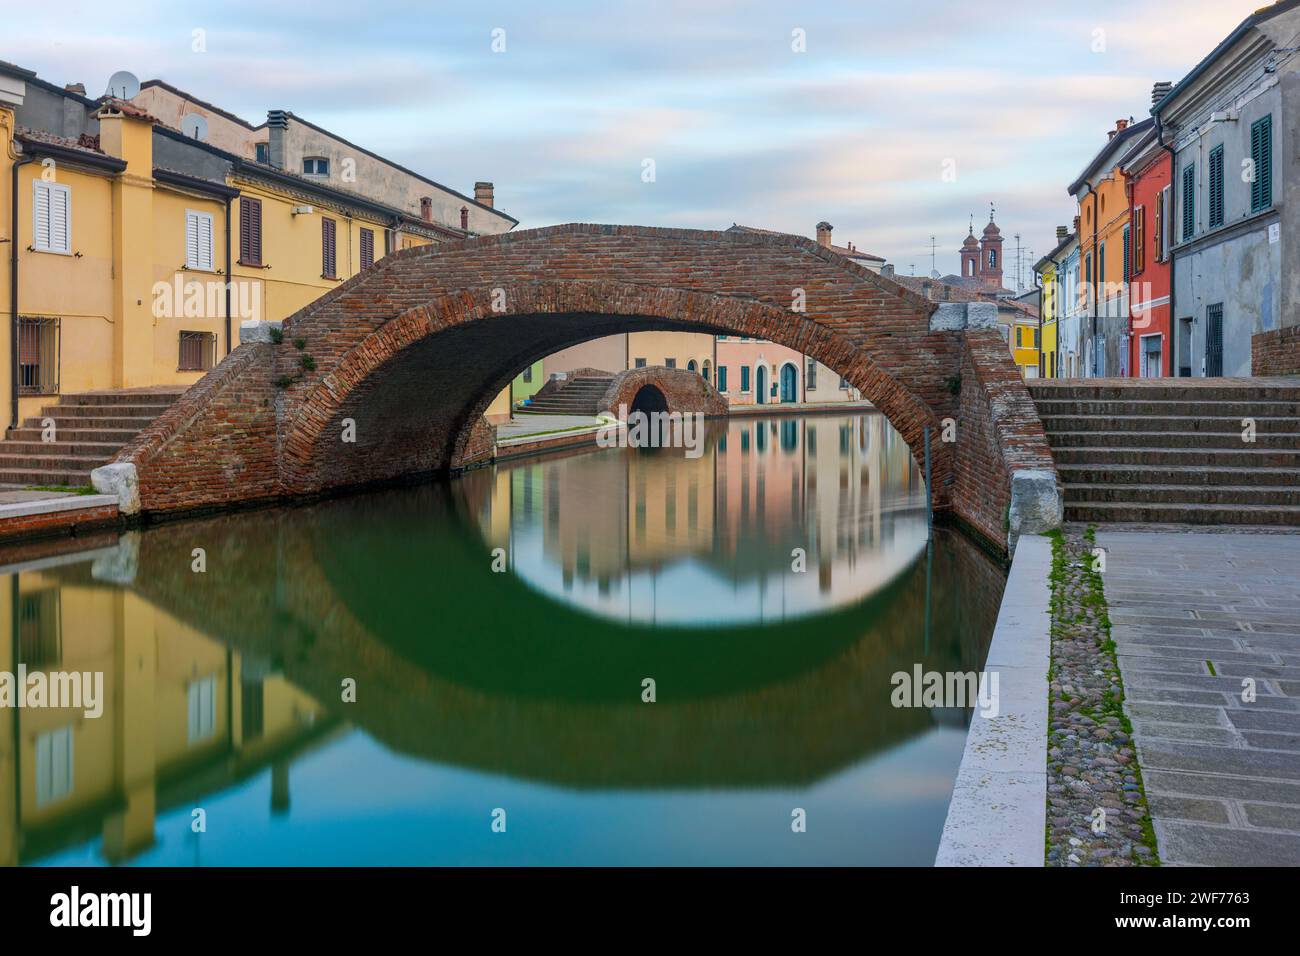 The venetian-style town of Comacchio with its canals and bridges in the province of Ferrara, Emilia-Romagna, Italy. Stock Photo